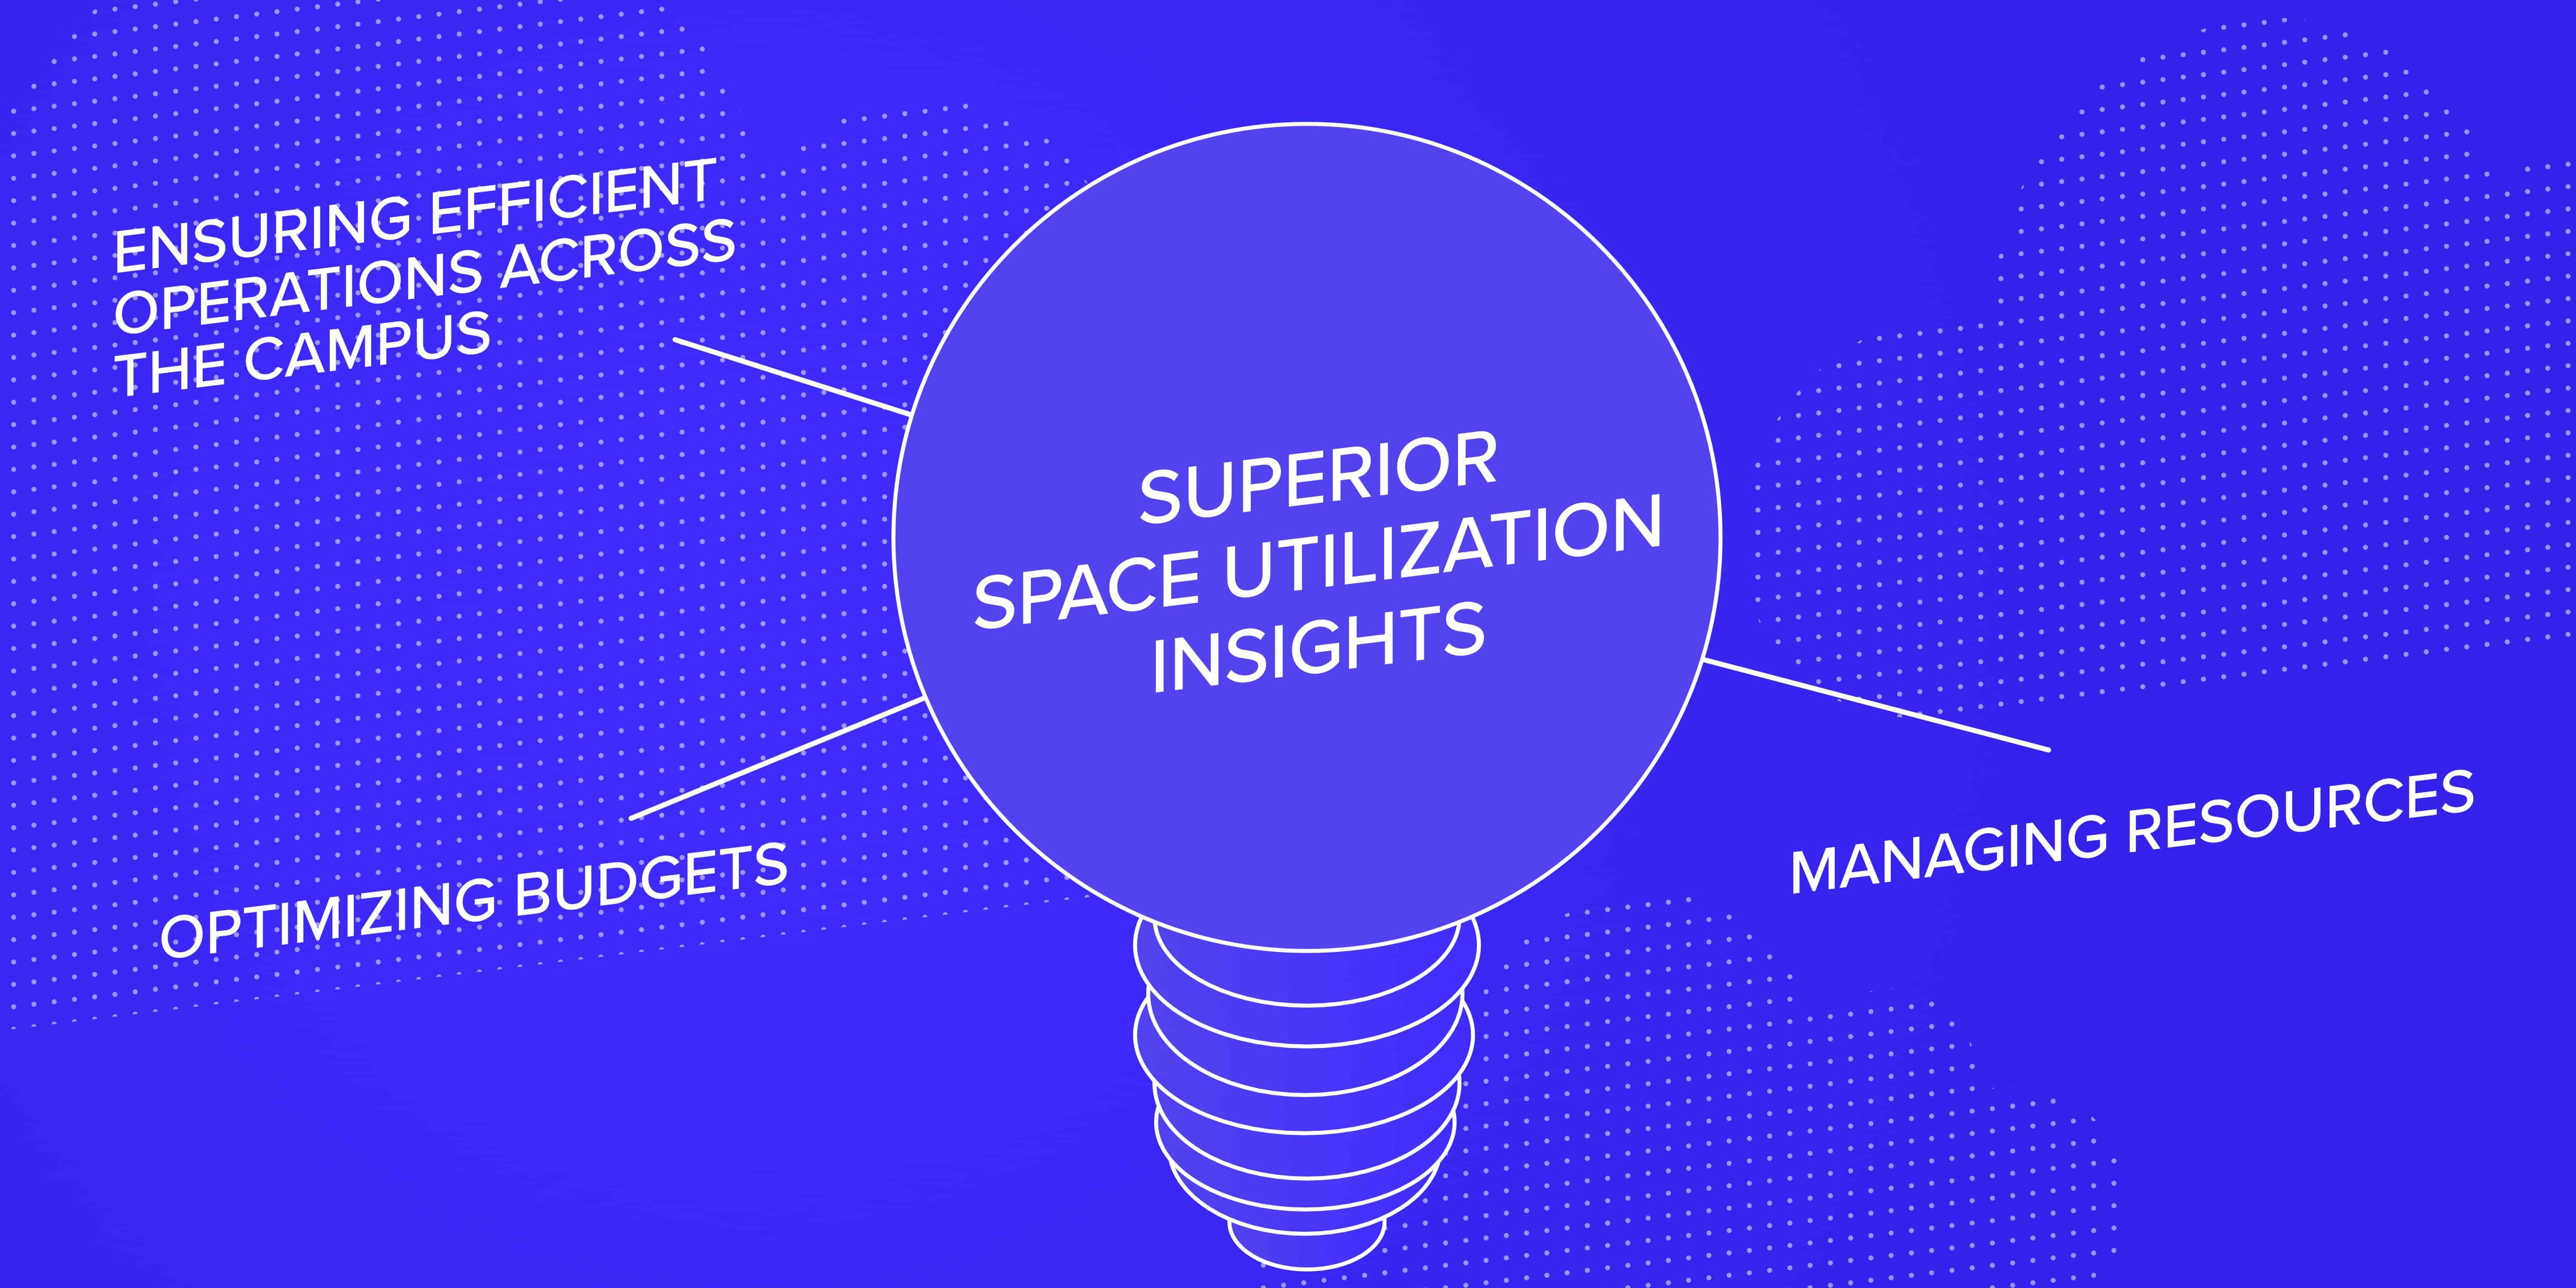 superior space utilization insights graphic by InnerSpace  